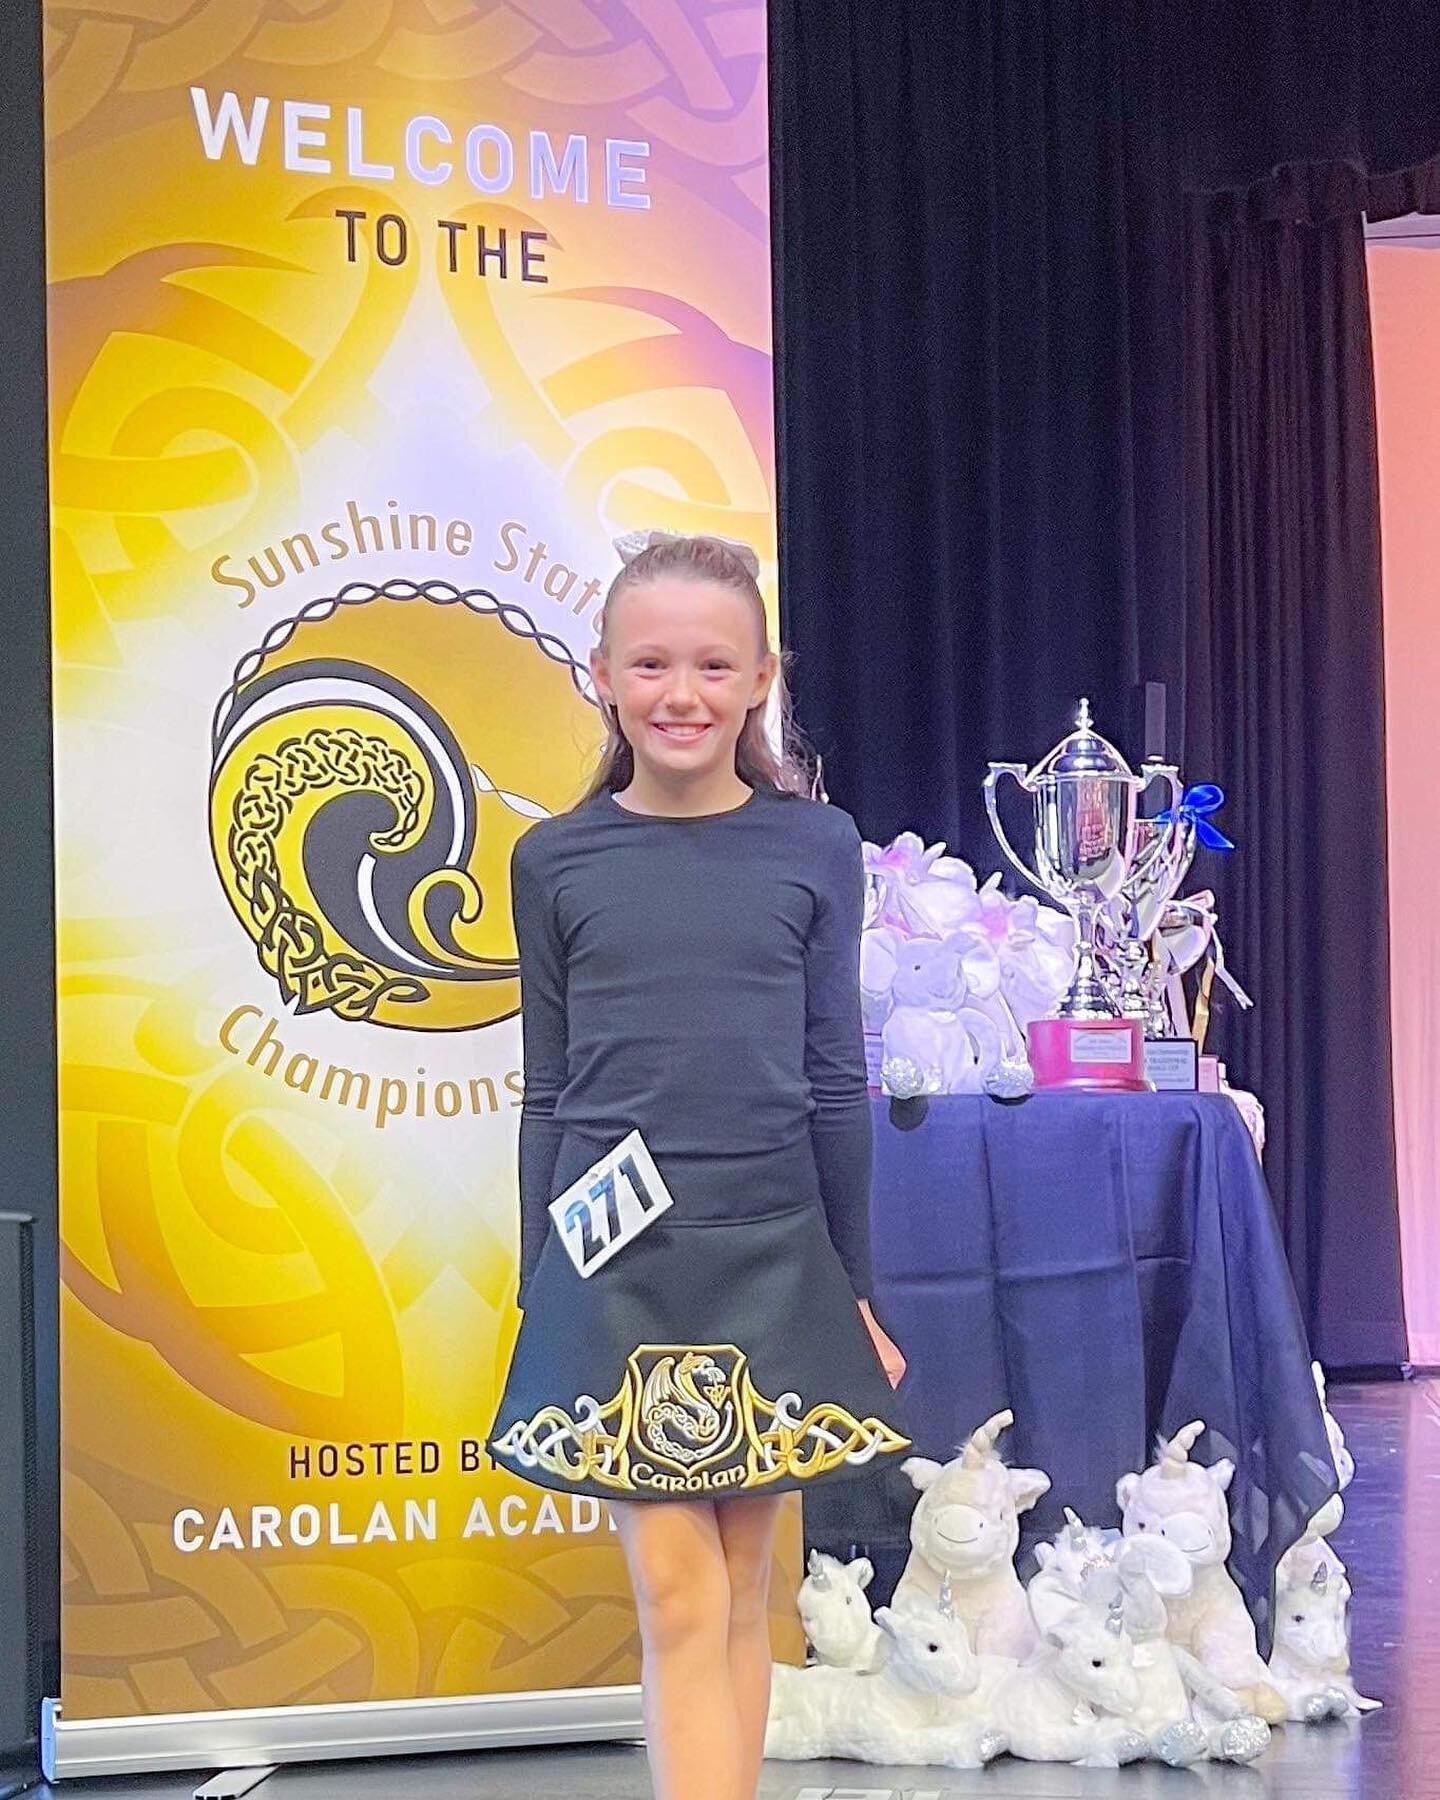 We had some fantastic results for our Primary &amp; Intermediate dancers at the weekend! 🤩🤩🤩 Big congrats to Eila, Kaelia, Ava-Belle &amp; Jacy! Well done guys! 

@sunshinestatechampionships
#thecarolanacademy #feis 
#sunshinestatechampionships202